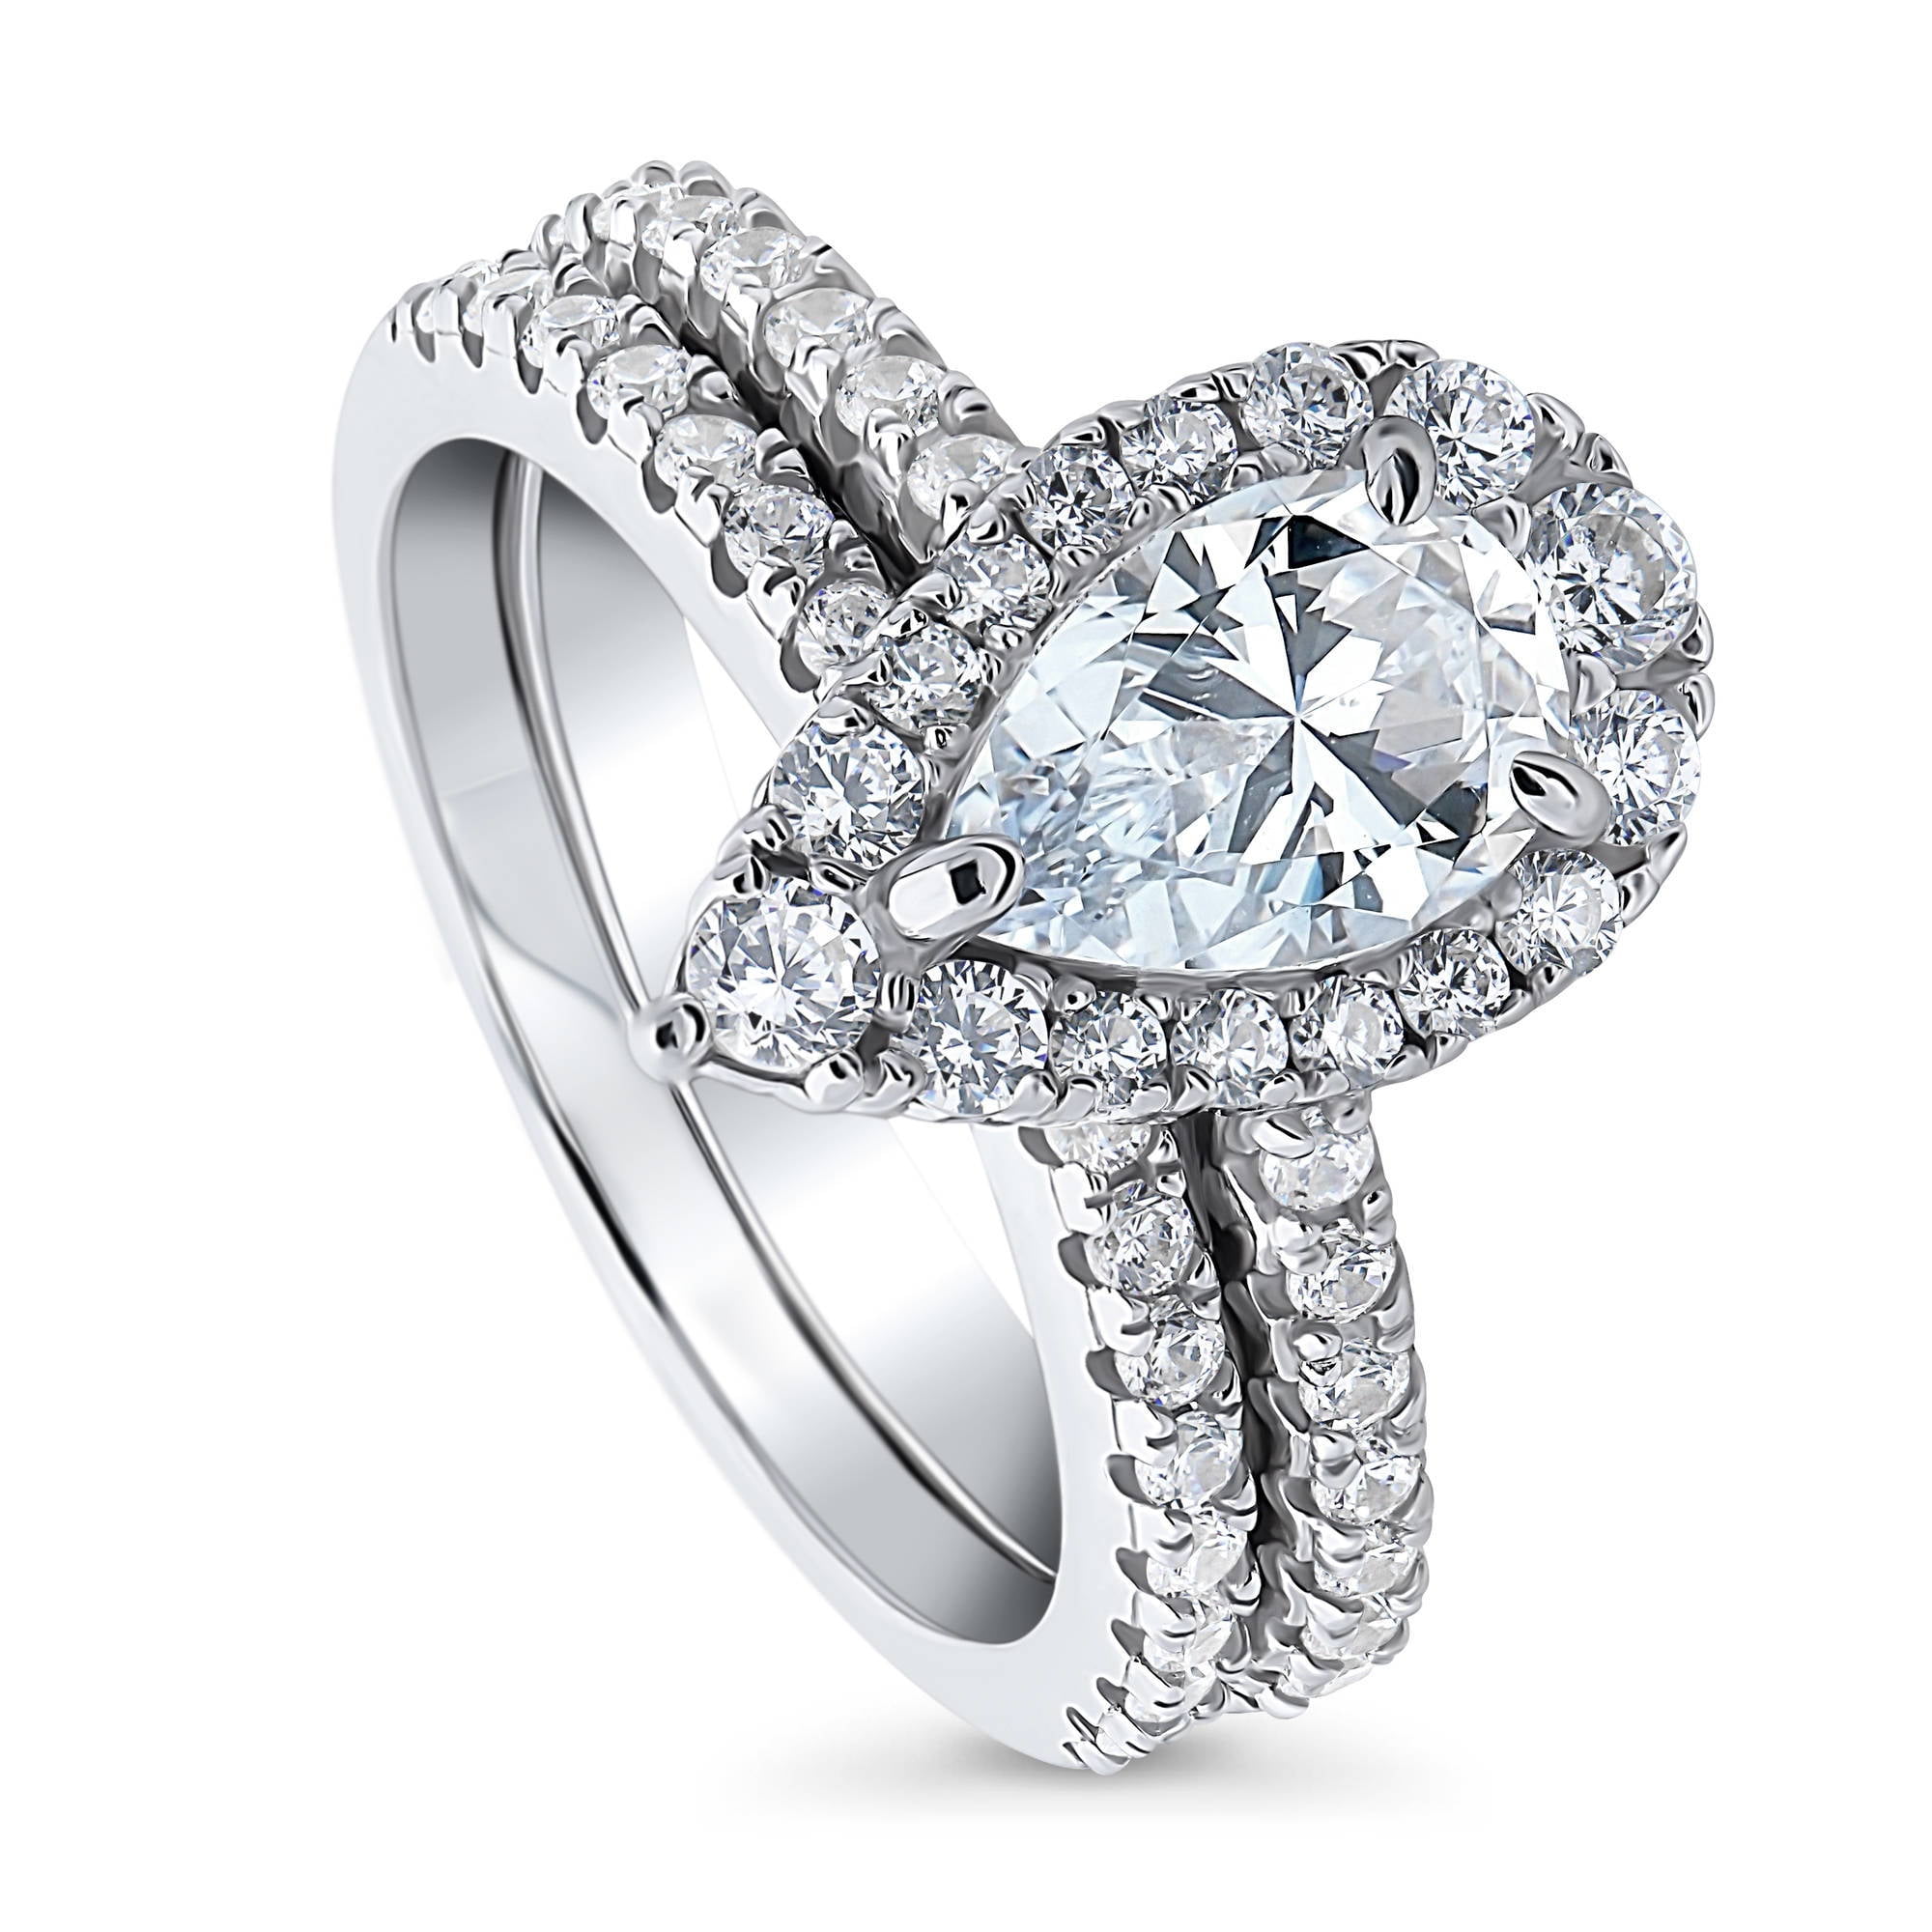 Cubic Zirconia Engagement Ring - Silver 8